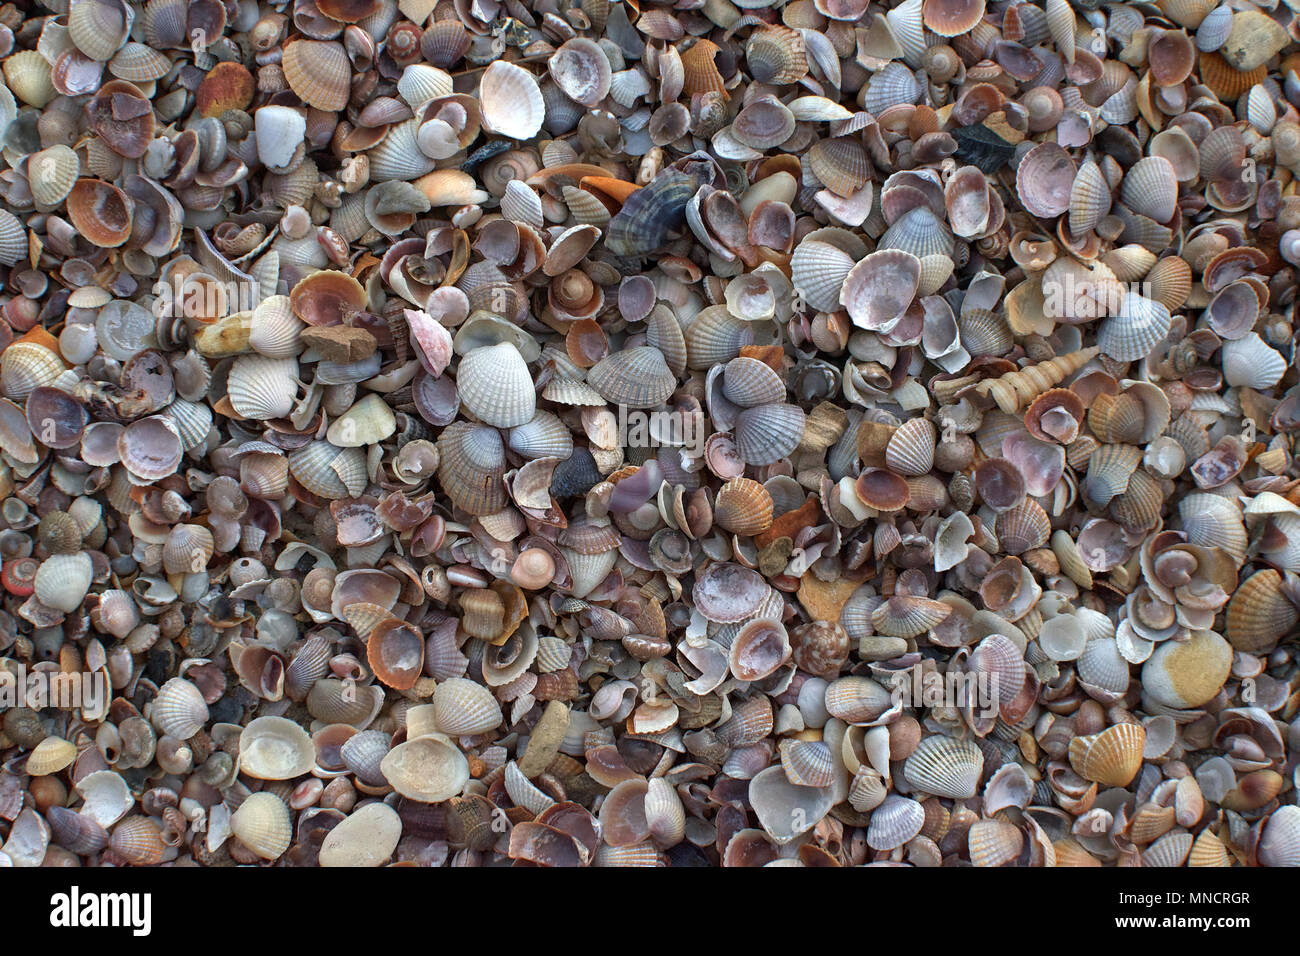 Mussels Closeup detailed on a Beach wallpaper texture background Stock Photo